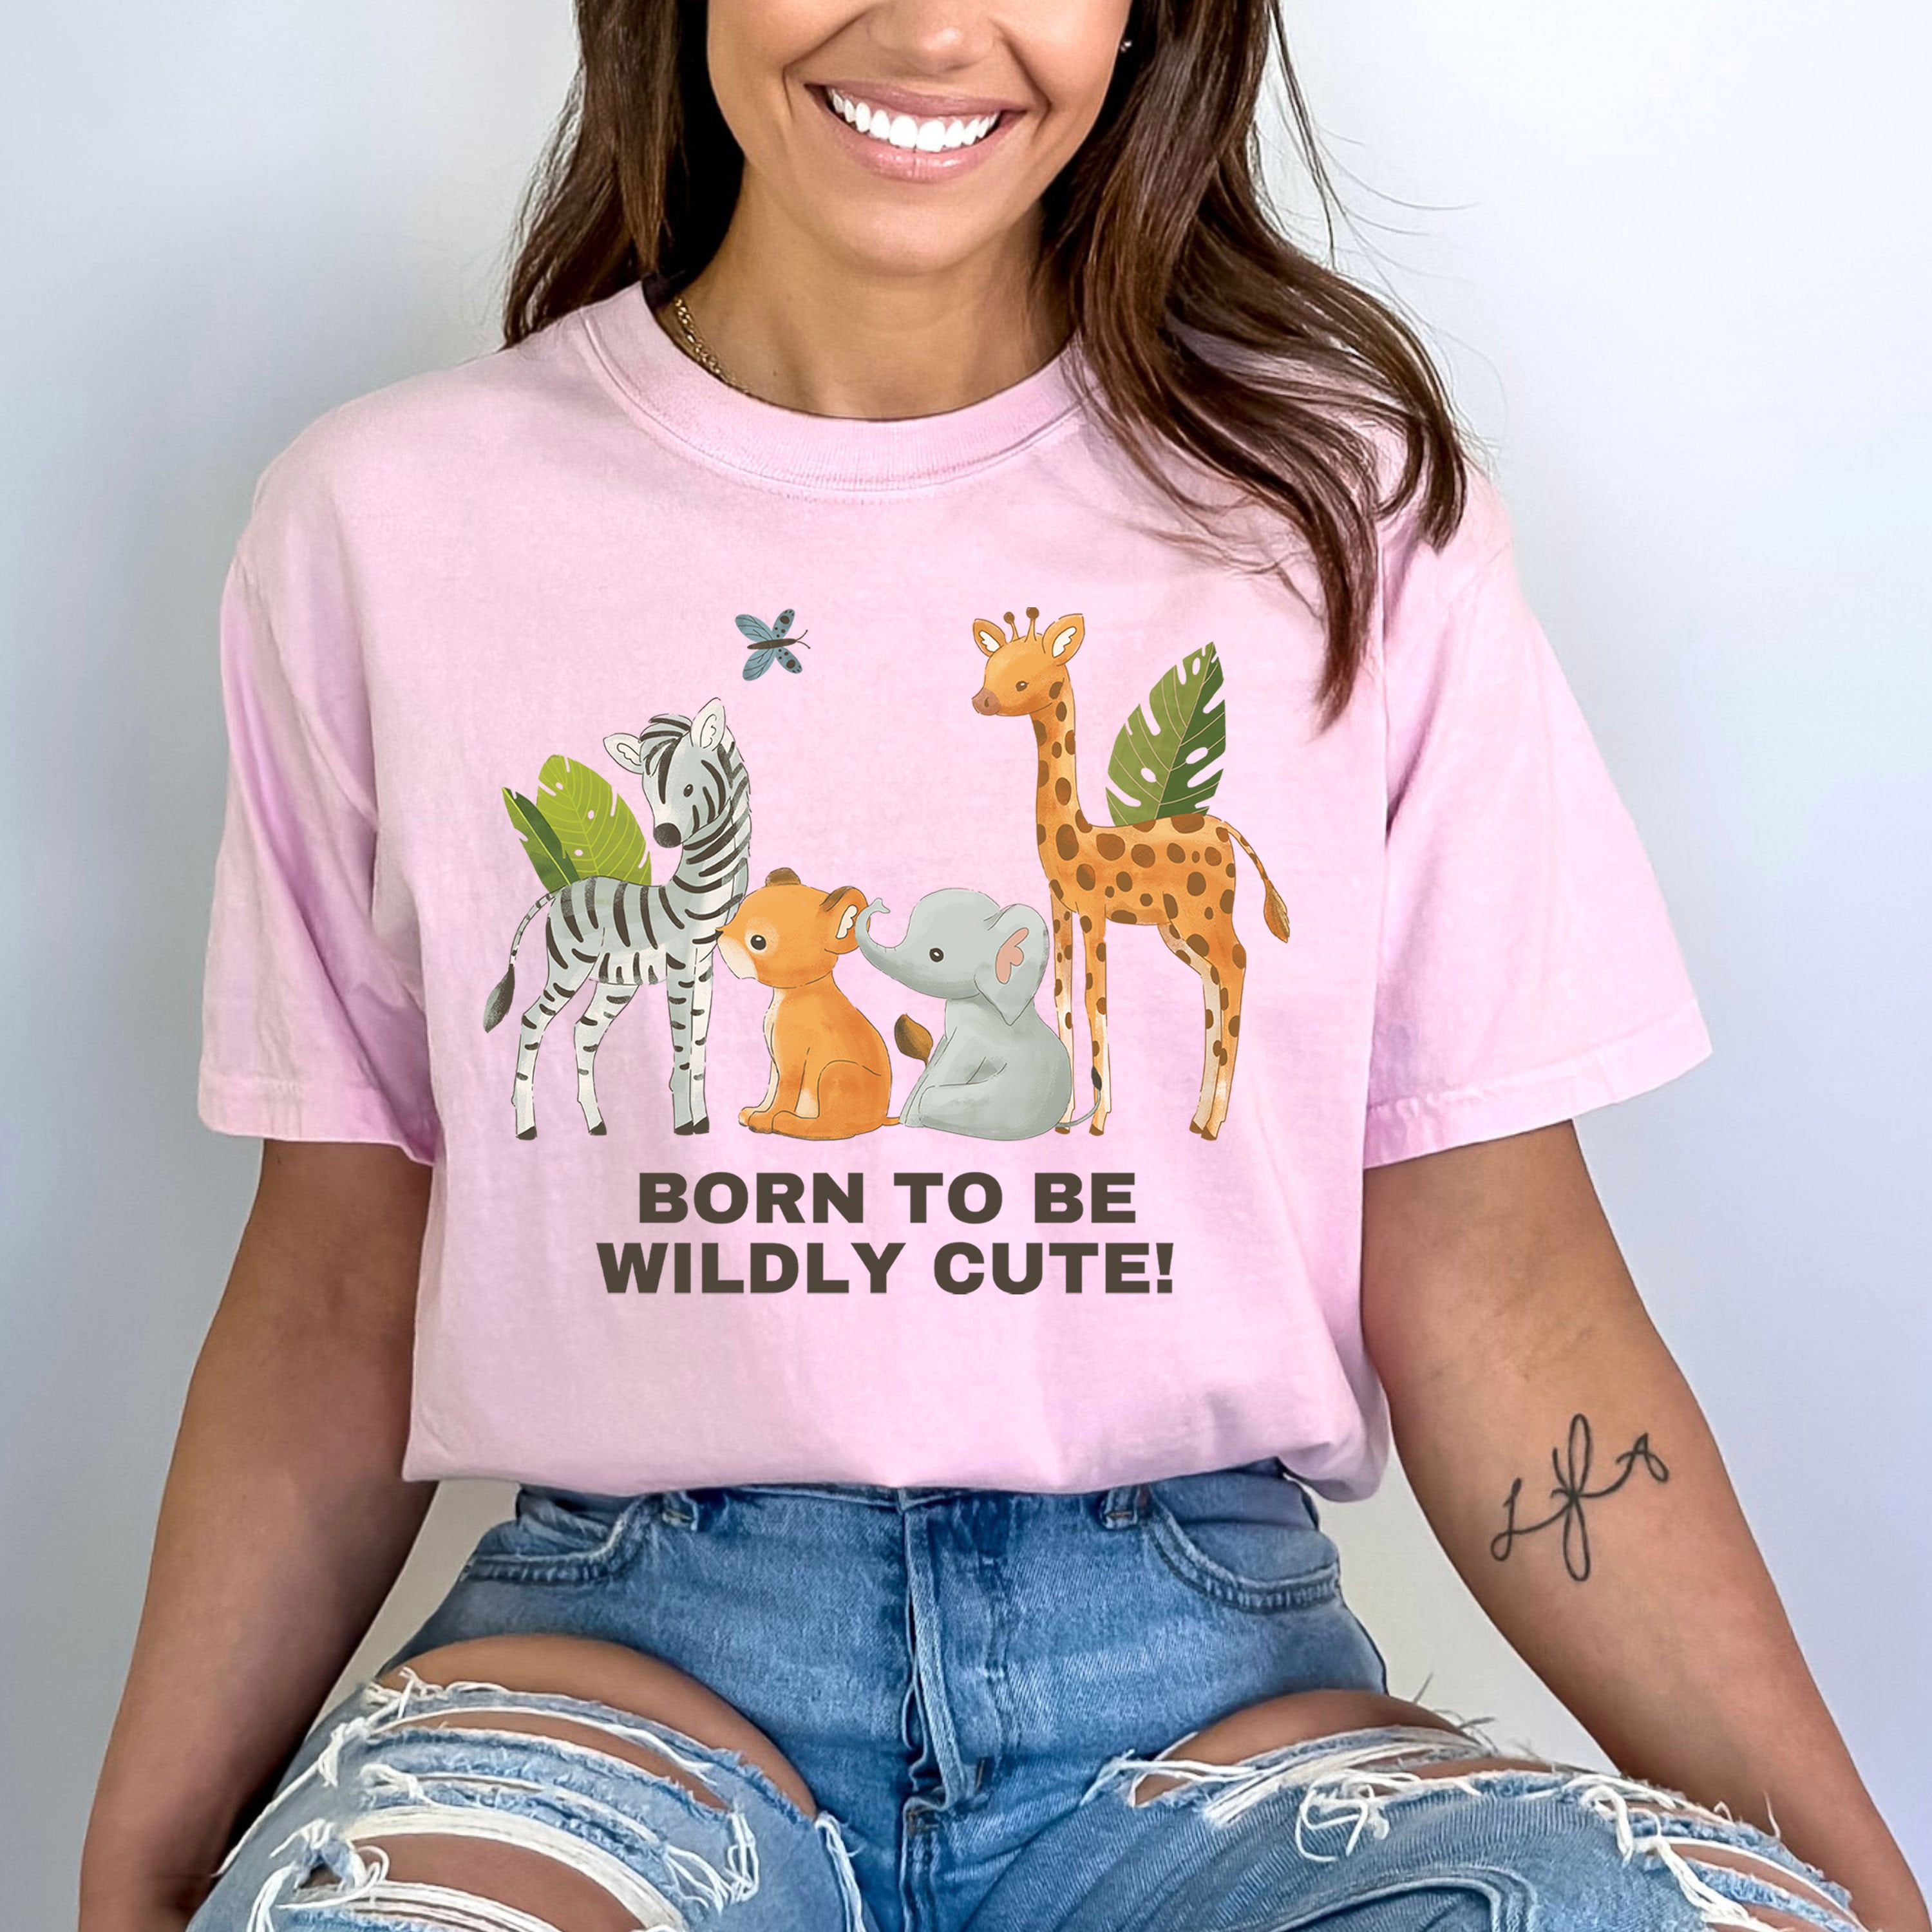 Born To Be Wildly Cute - Bella Canvas